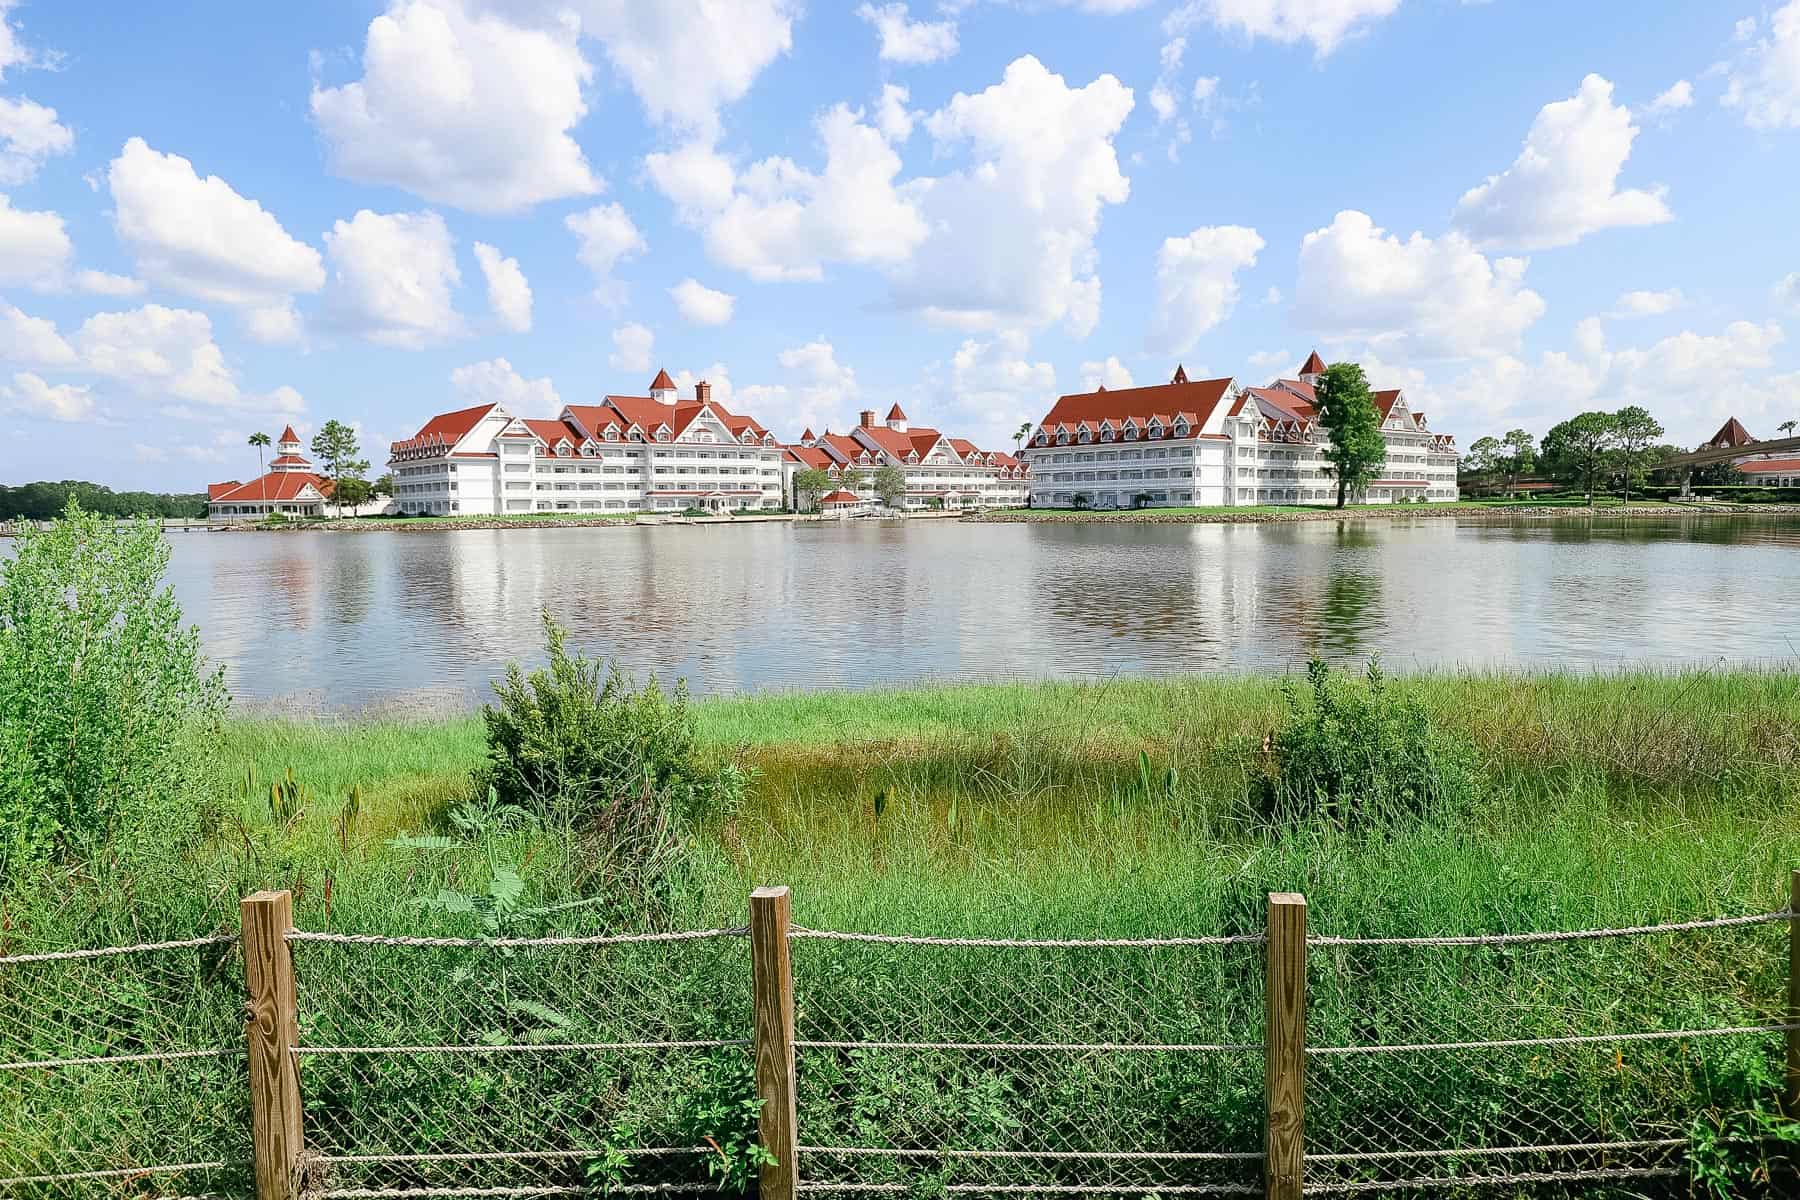 Disney's Grand Floridian as seen from the walking path to Magic Kingdom.